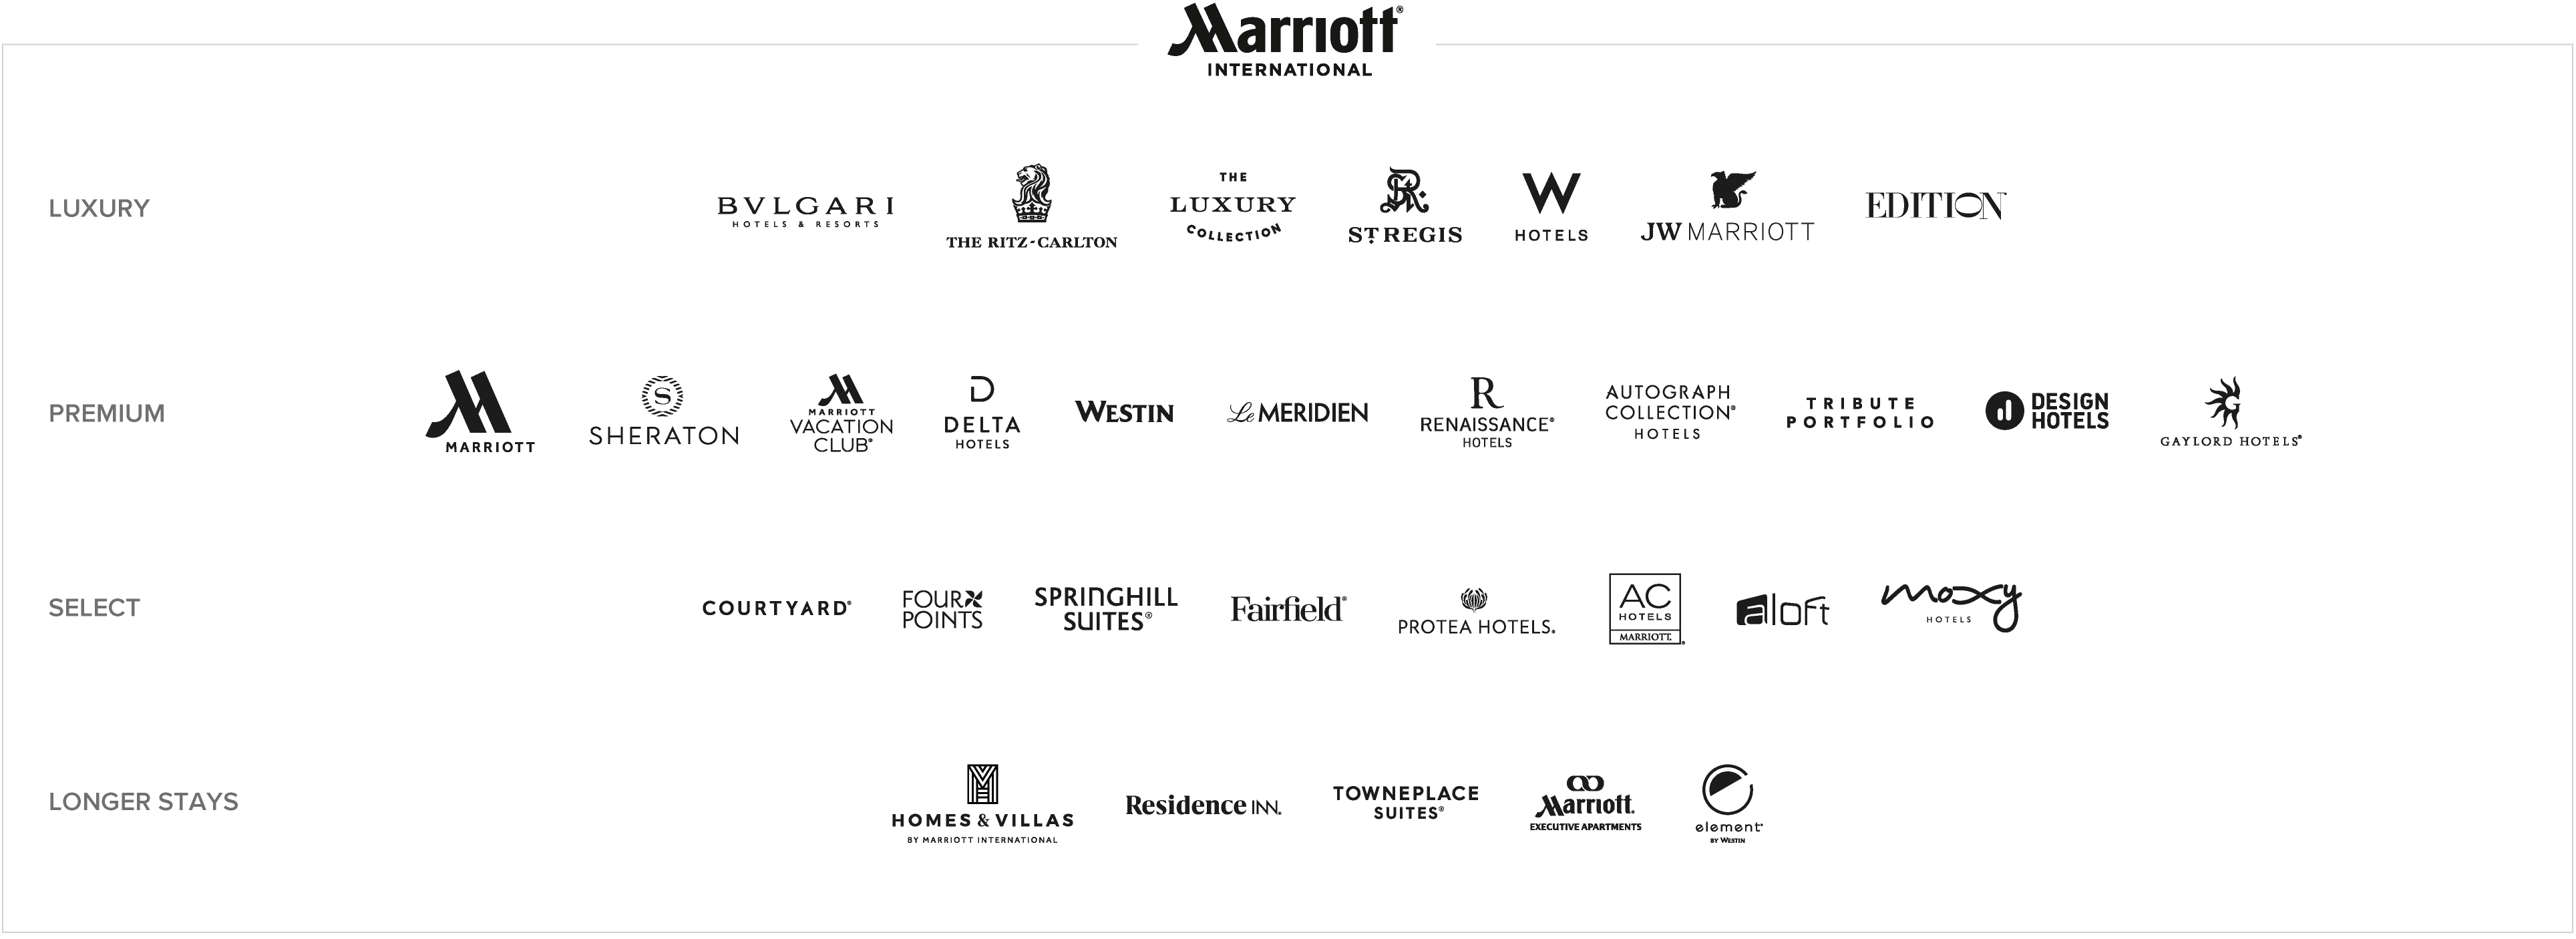 Showcase of all the Marriott brands